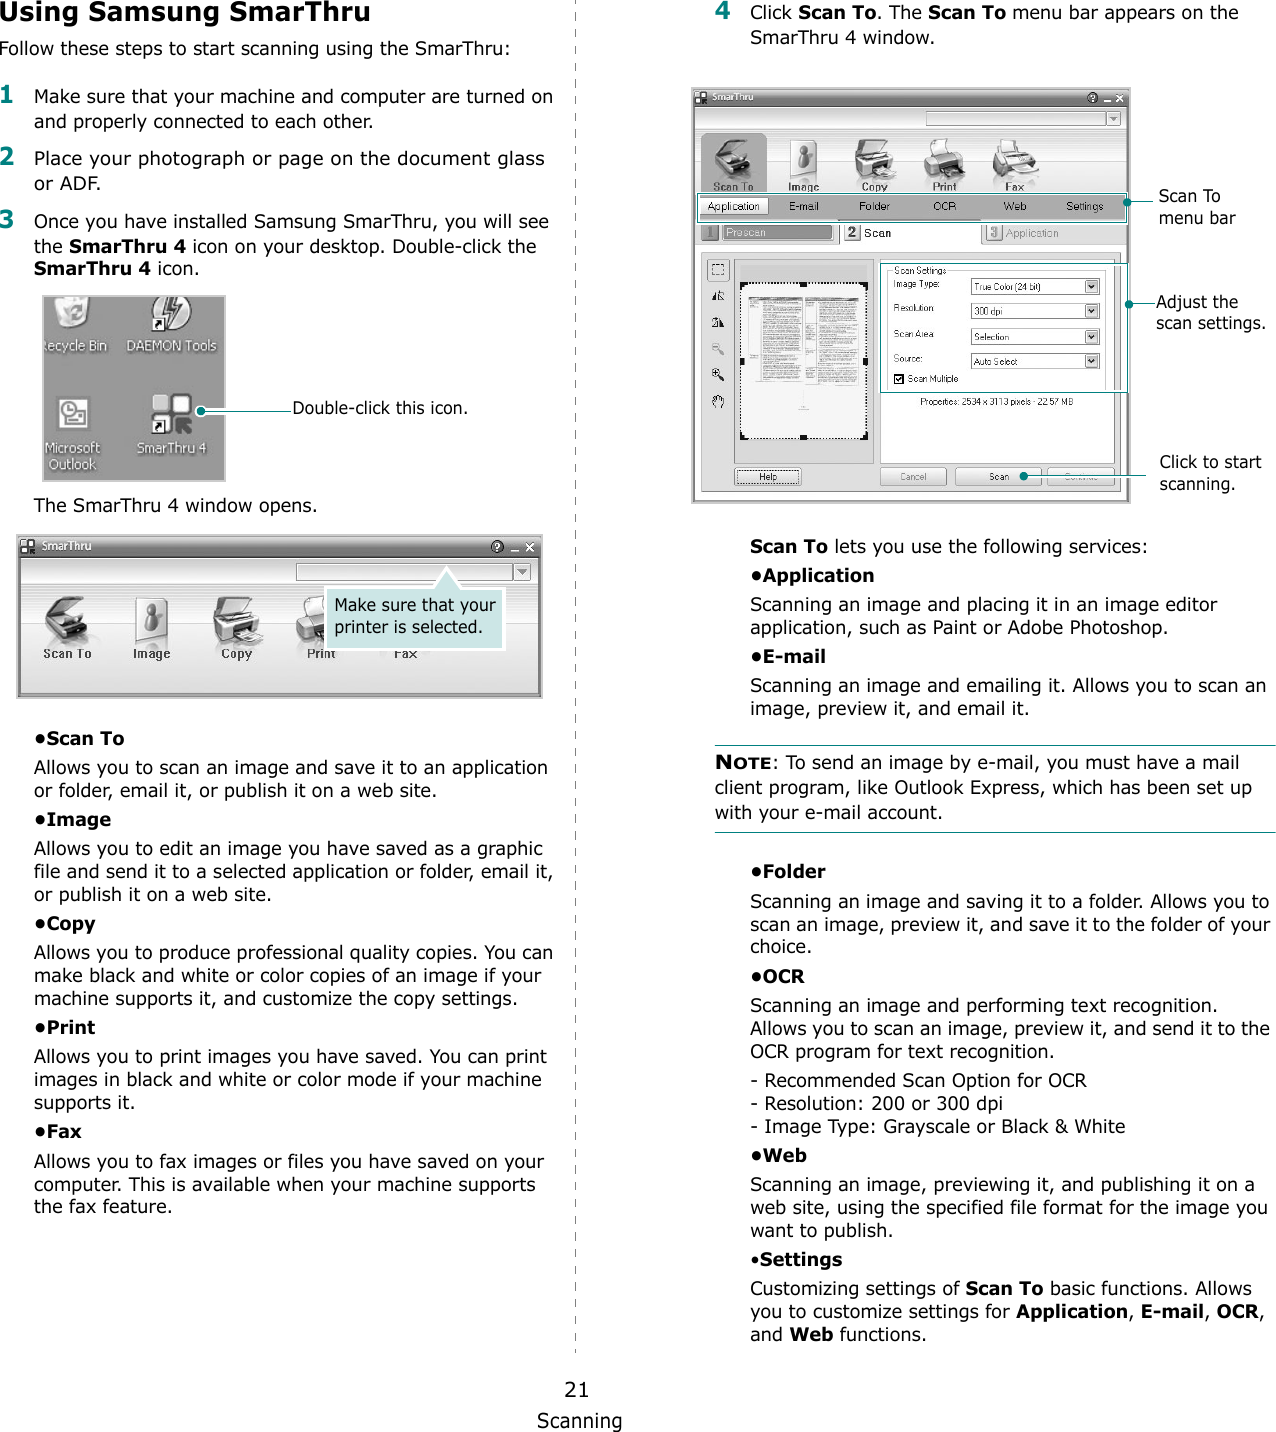 Scanning21Using Samsung SmarThruFollow these steps to start scanning using the SmarThru:1Make sure that your machine and computer are turned on and properly connected to each other. 2Place your photograph or page on the document glass or ADF.3Once you have installed Samsung SmarThru, you will see the SmarThru 4 icon on your desktop. Double-click the SmarThru 4 icon.The SmarThru 4 window opens.•Scan ToAllows you to scan an image and save it to an application or folder, email it, or publish it on a web site. •ImageAllows you to edit an image you have saved as a graphic file and send it to a selected application or folder, email it, or publish it on a web site. •CopyAllows you to produce professional quality copies. You can make black and white or color copies of an image if your machine supports it, and customize the copy settings. •PrintAllows you to print images you have saved. You can print images in black and white or color mode if your machine supports it.•FaxAllows you to fax images or files you have saved on your computer. This is available when your machine supports the fax feature. Double-click this icon.Make sure that your printer is selected.4Click Scan To. The Scan To menu bar appears on the SmarThru 4 window.Scan To lets you use the following services:•ApplicationScanning an image and placing it in an image editor application, such as Paint or Adobe Photoshop. •E-mailScanning an image and emailing it. Allows you to scan an image, preview it, and email it. NOTE: To send an image by e-mail, you must have a mail client program, like Outlook Express, which has been set up with your e-mail account.•FolderScanning an image and saving it to a folder. Allows you to scan an image, preview it, and save it to the folder of your choice.•OCRScanning an image and performing text recognition. Allows you to scan an image, preview it, and send it to the OCR program for text recognition. - Recommended Scan Option for OCR- Resolution: 200 or 300 dpi- Image Type: Grayscale or Black &amp; White•WebScanning an image, previewing it, and publishing it on a web site, using the specified file format for the image you want to publish.•SettingsCustomizing settings of Scan To basic functions. Allows you to customize settings for Application, E-mail, OCR, and Web functions.Adjust the scan settings.Scan To menu barClick to start scanning.